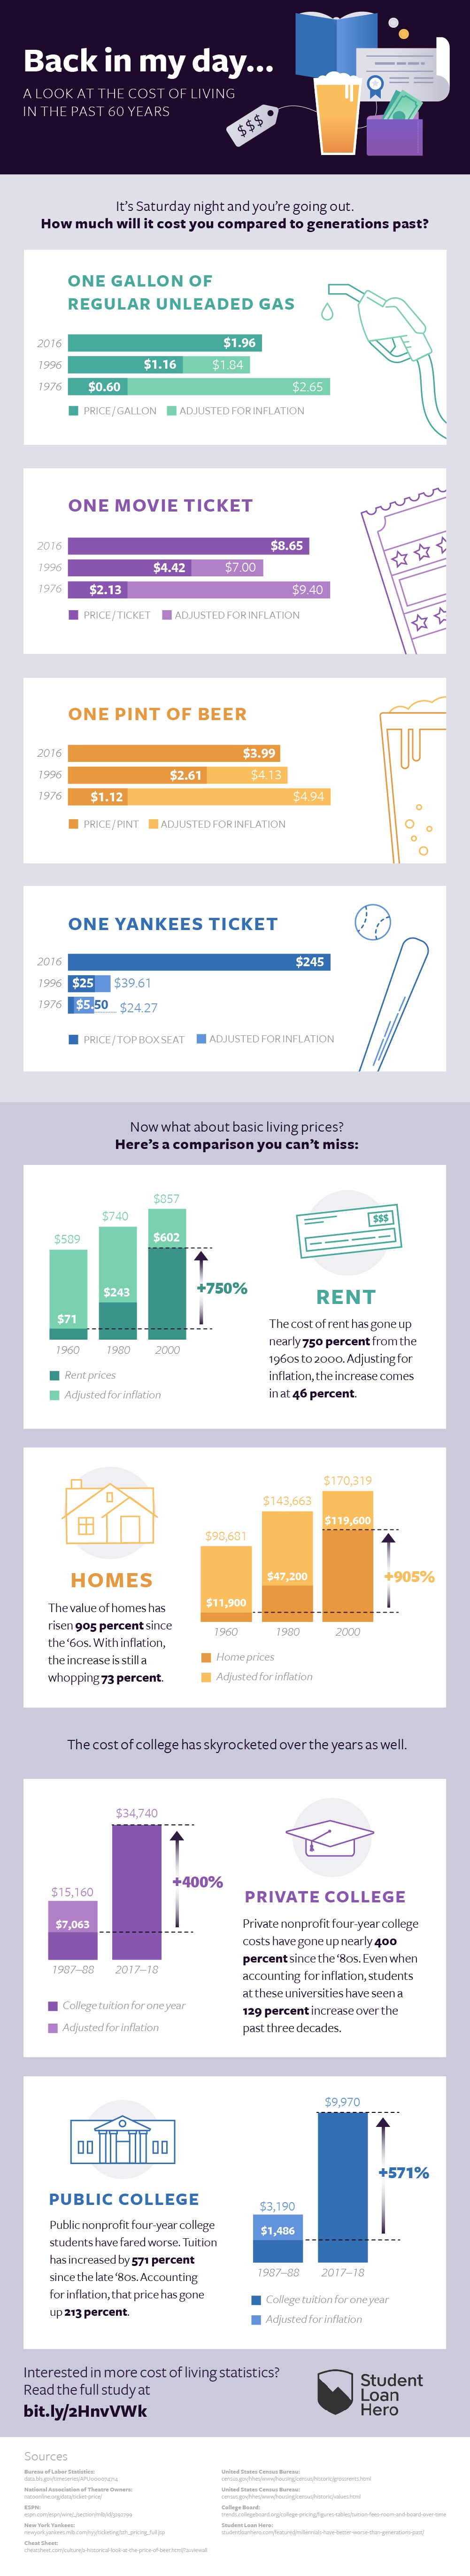 Do Millennials Have It Better Or Worse Than Generations Past? Infographic